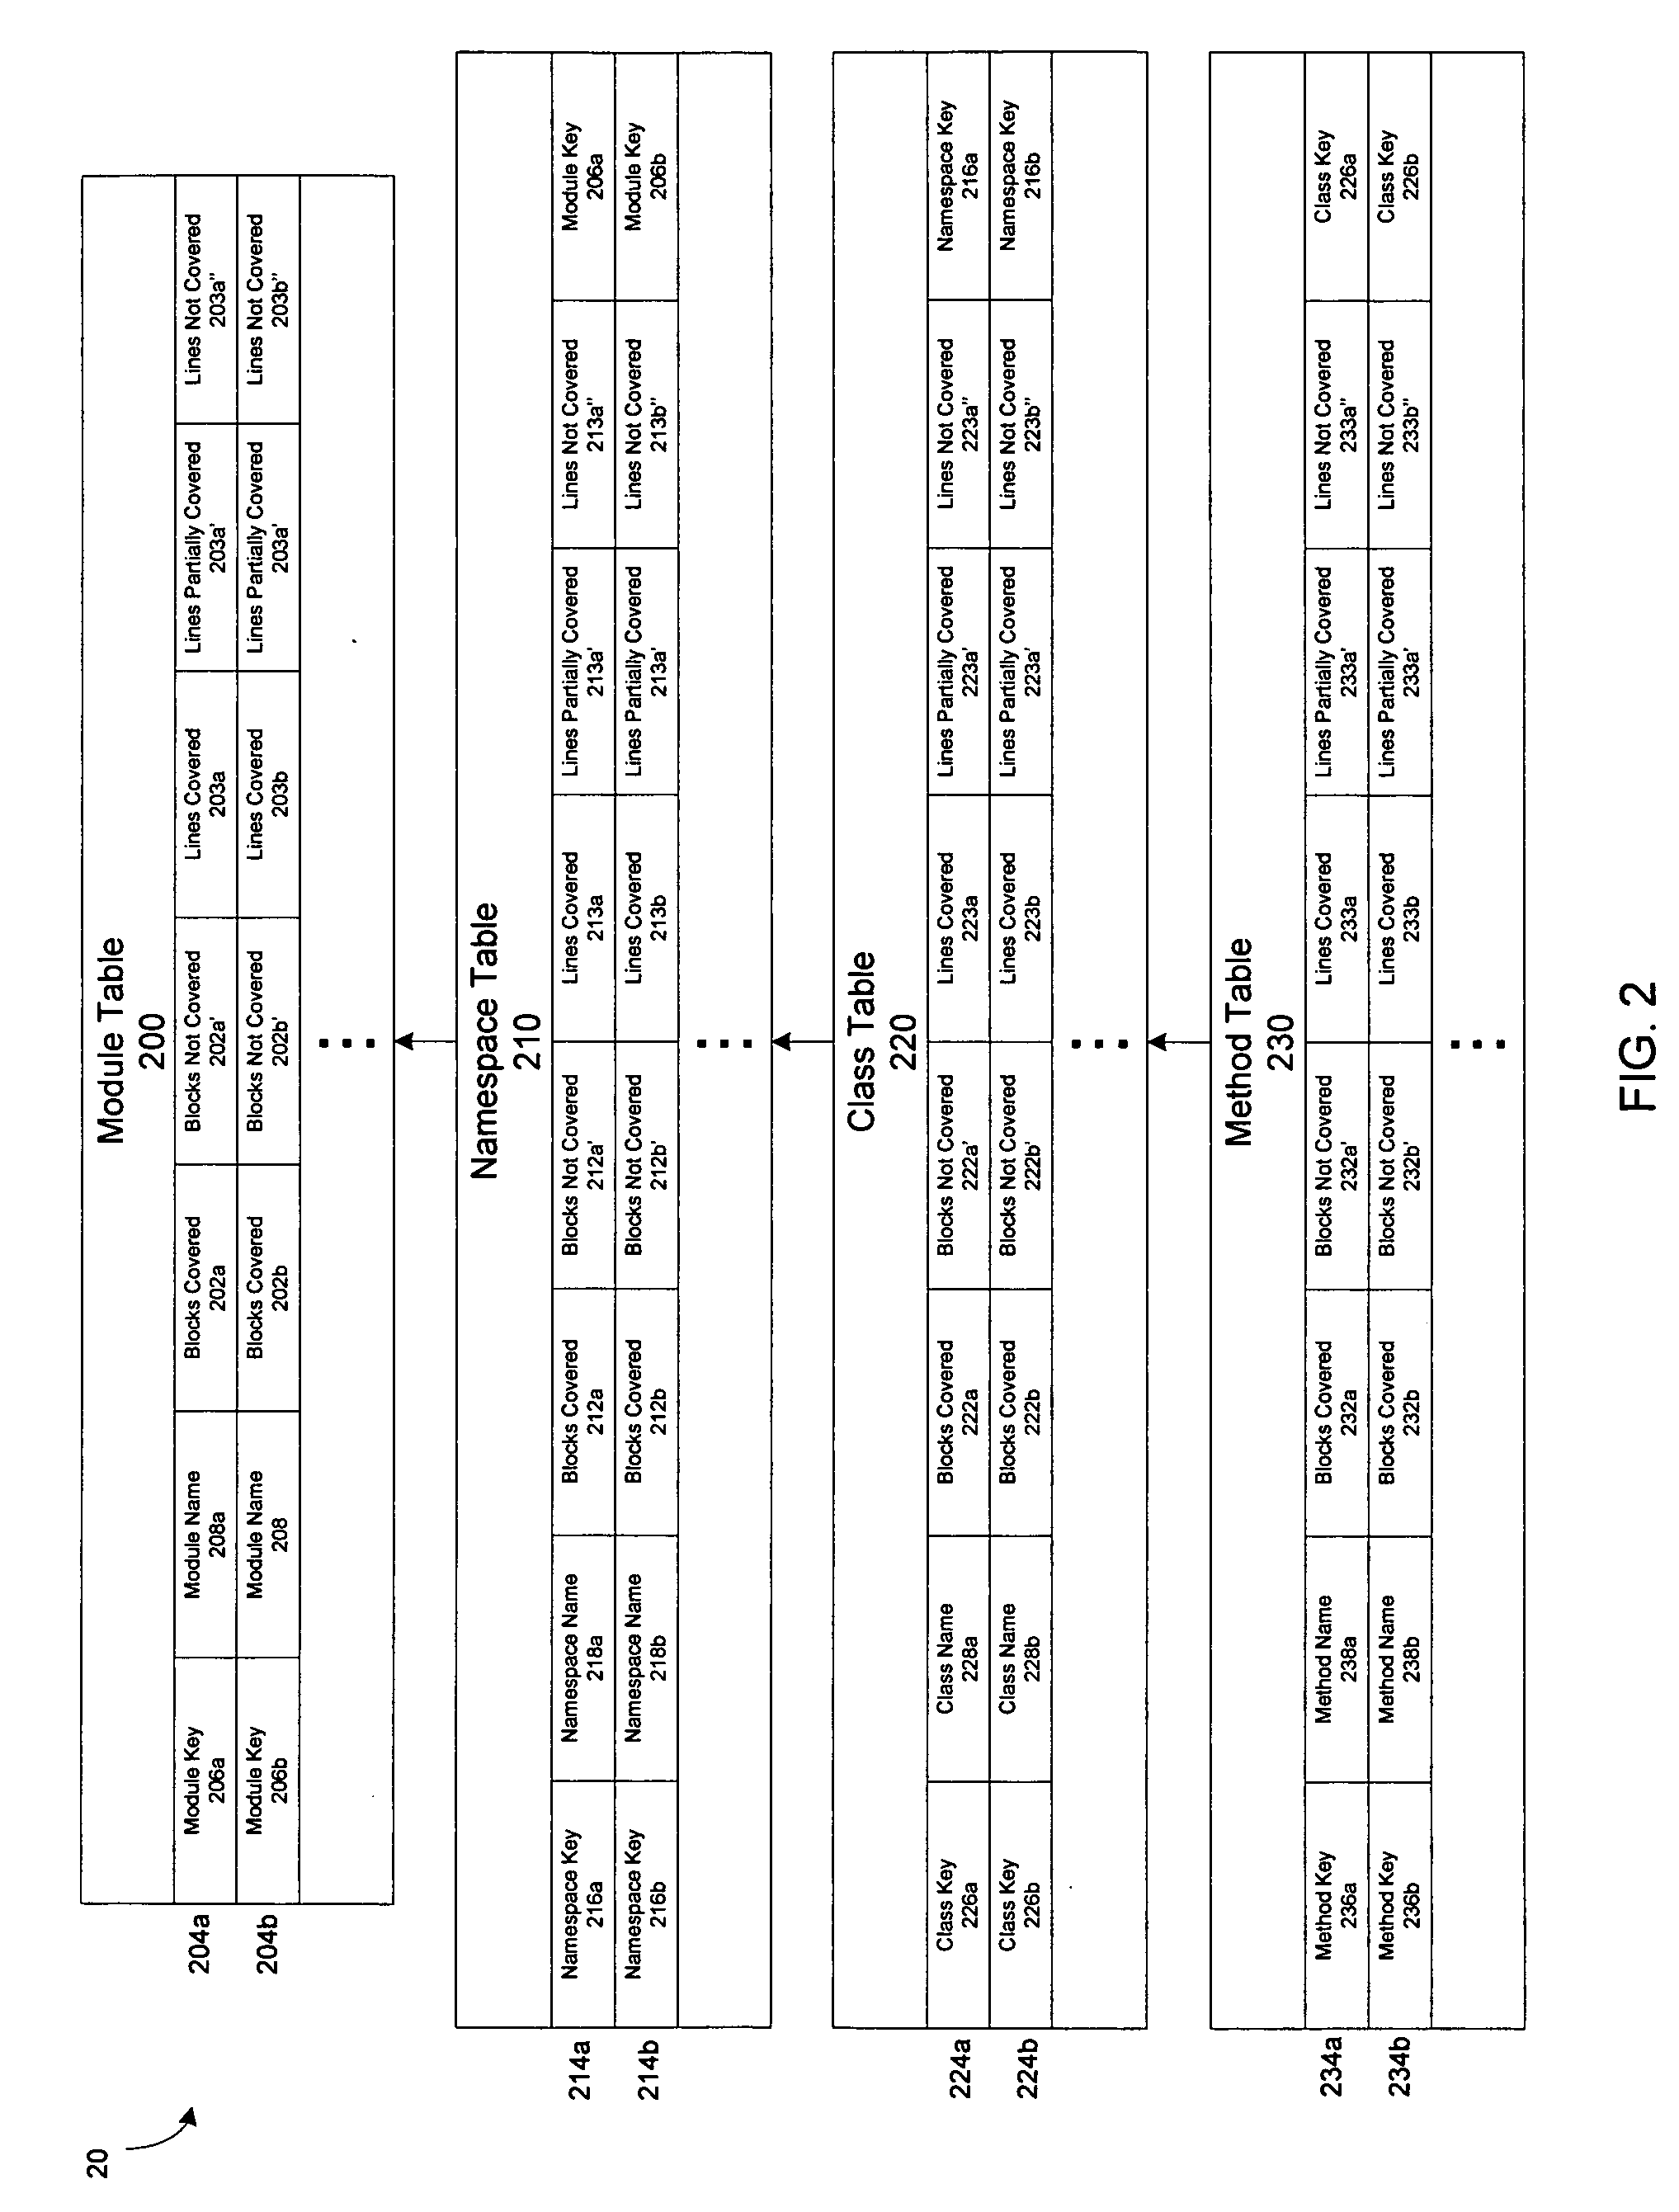 Methods and apparatus for handling code coverage data